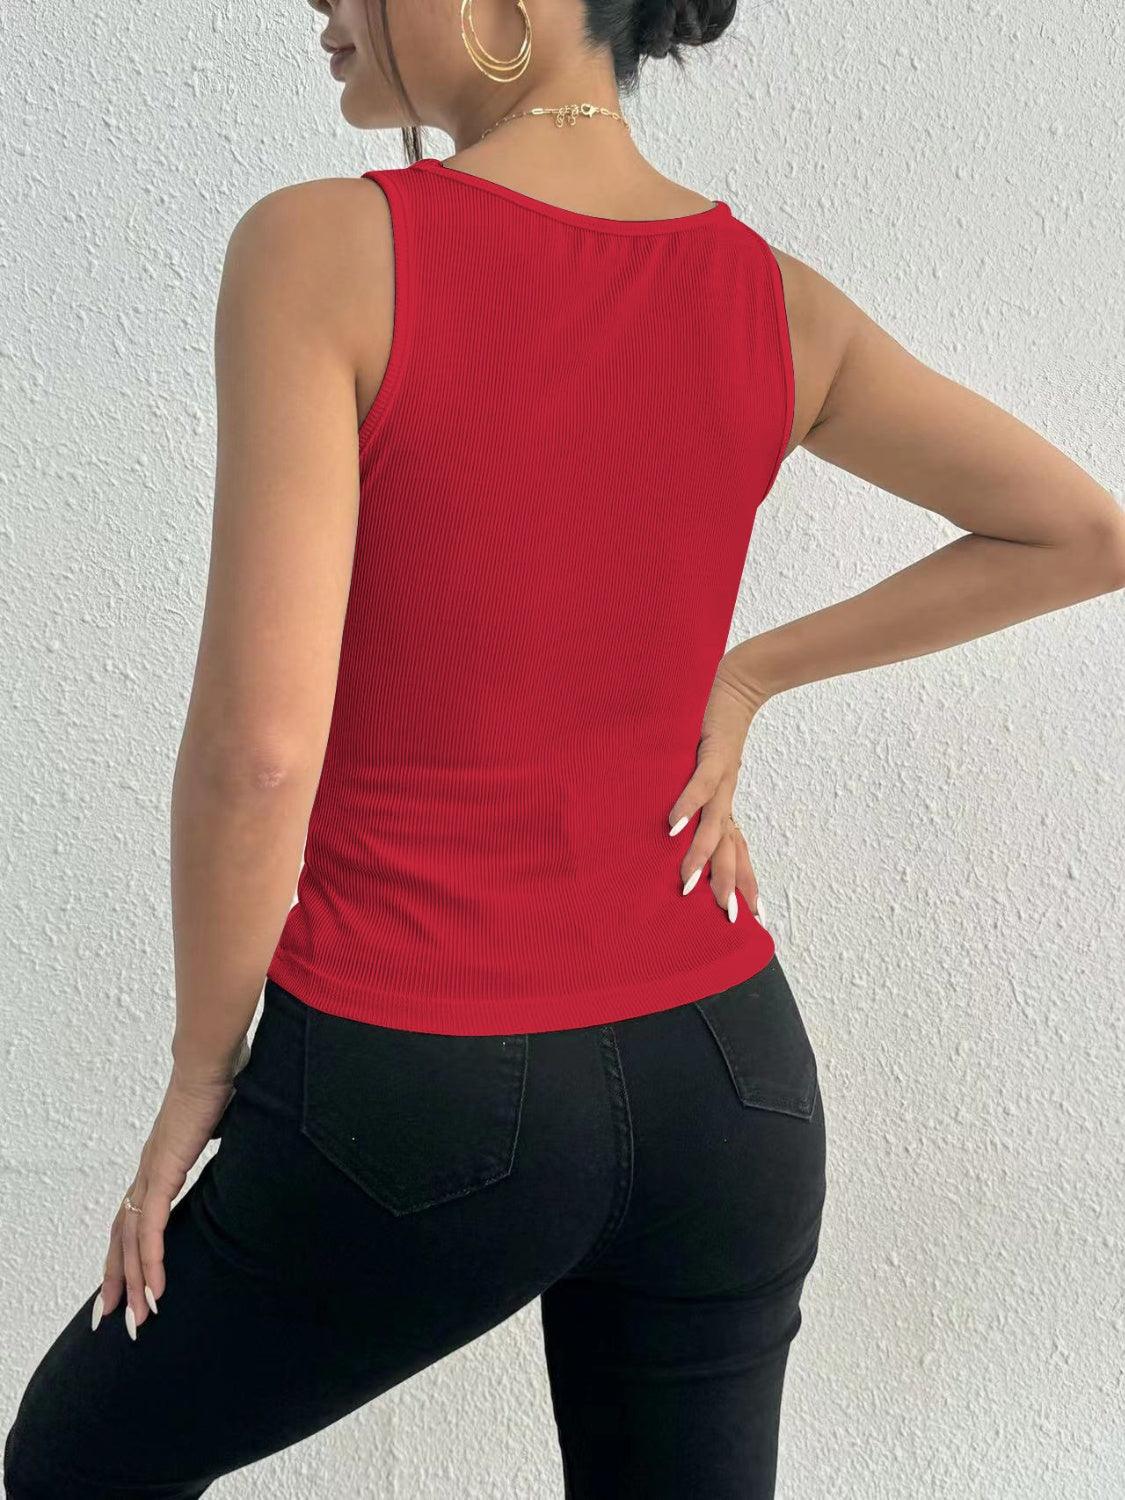 a woman in black pants and a red top